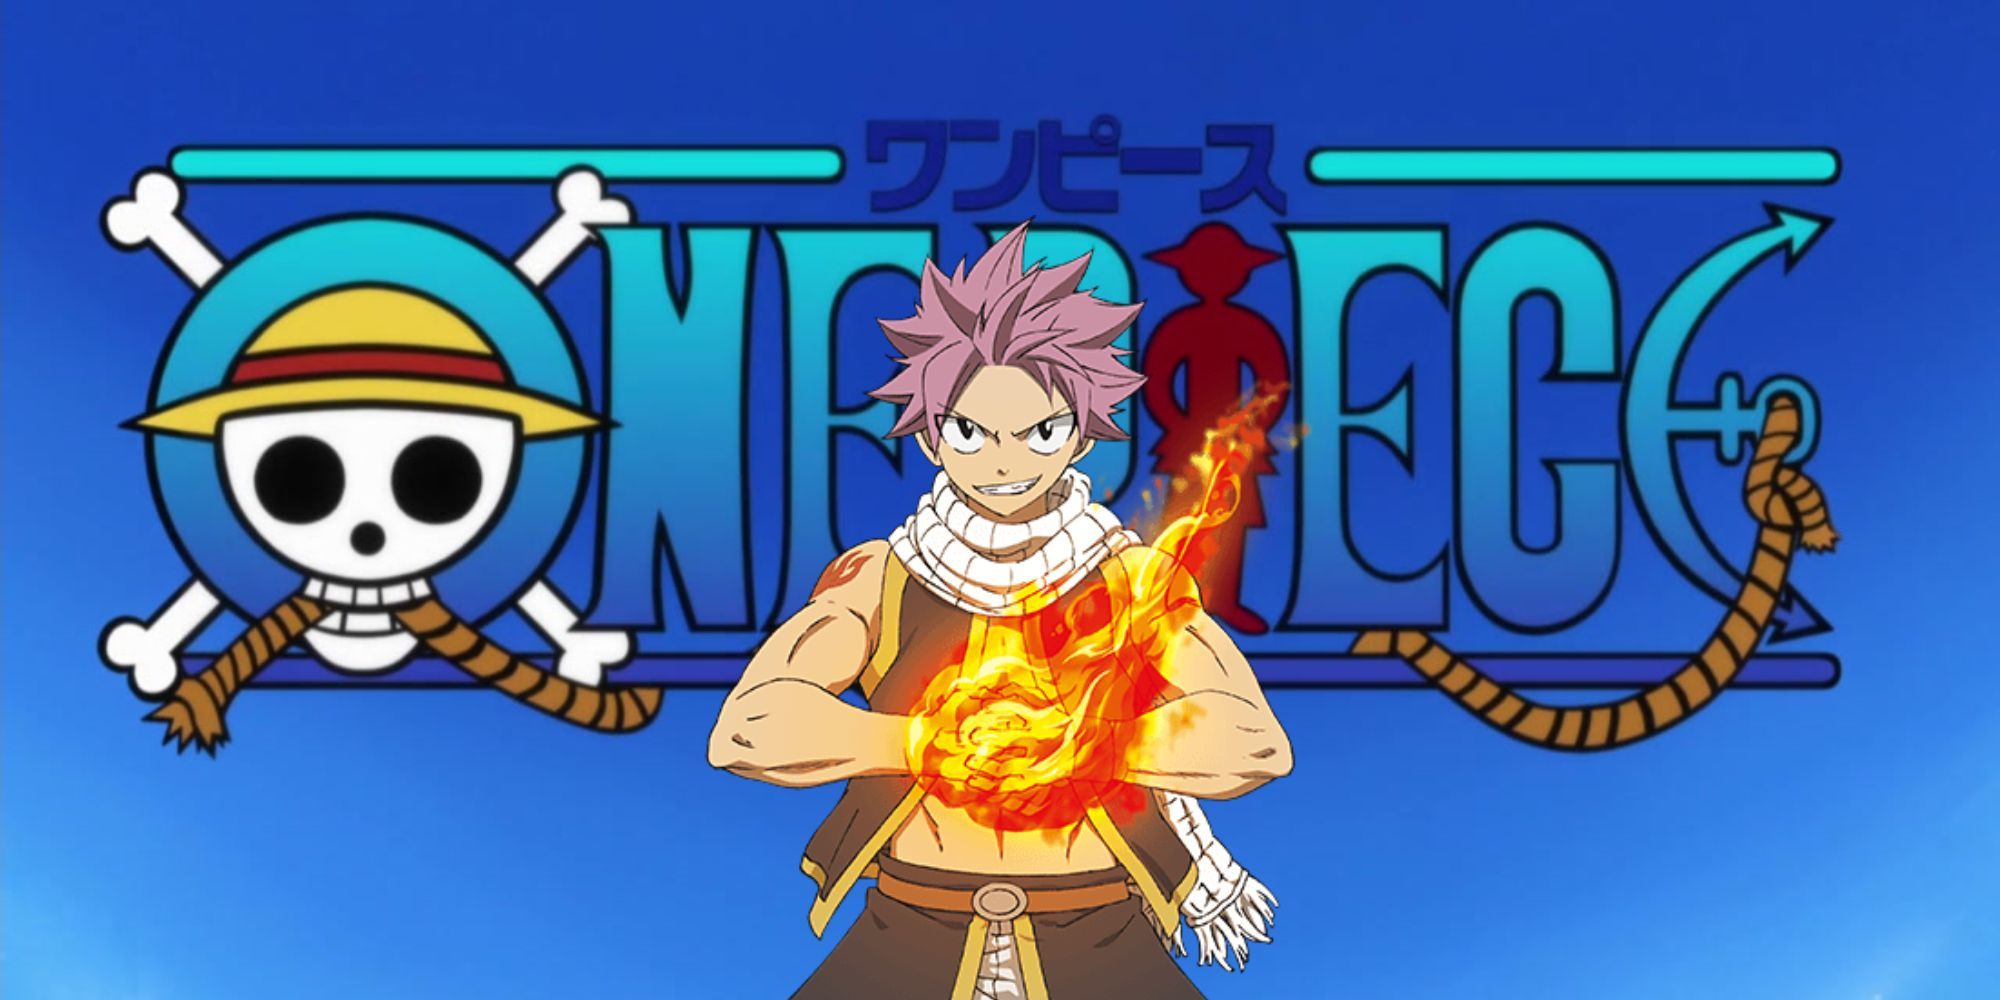 Fairy Tail's Natsu Dragneel Overlaying One Piece Logo